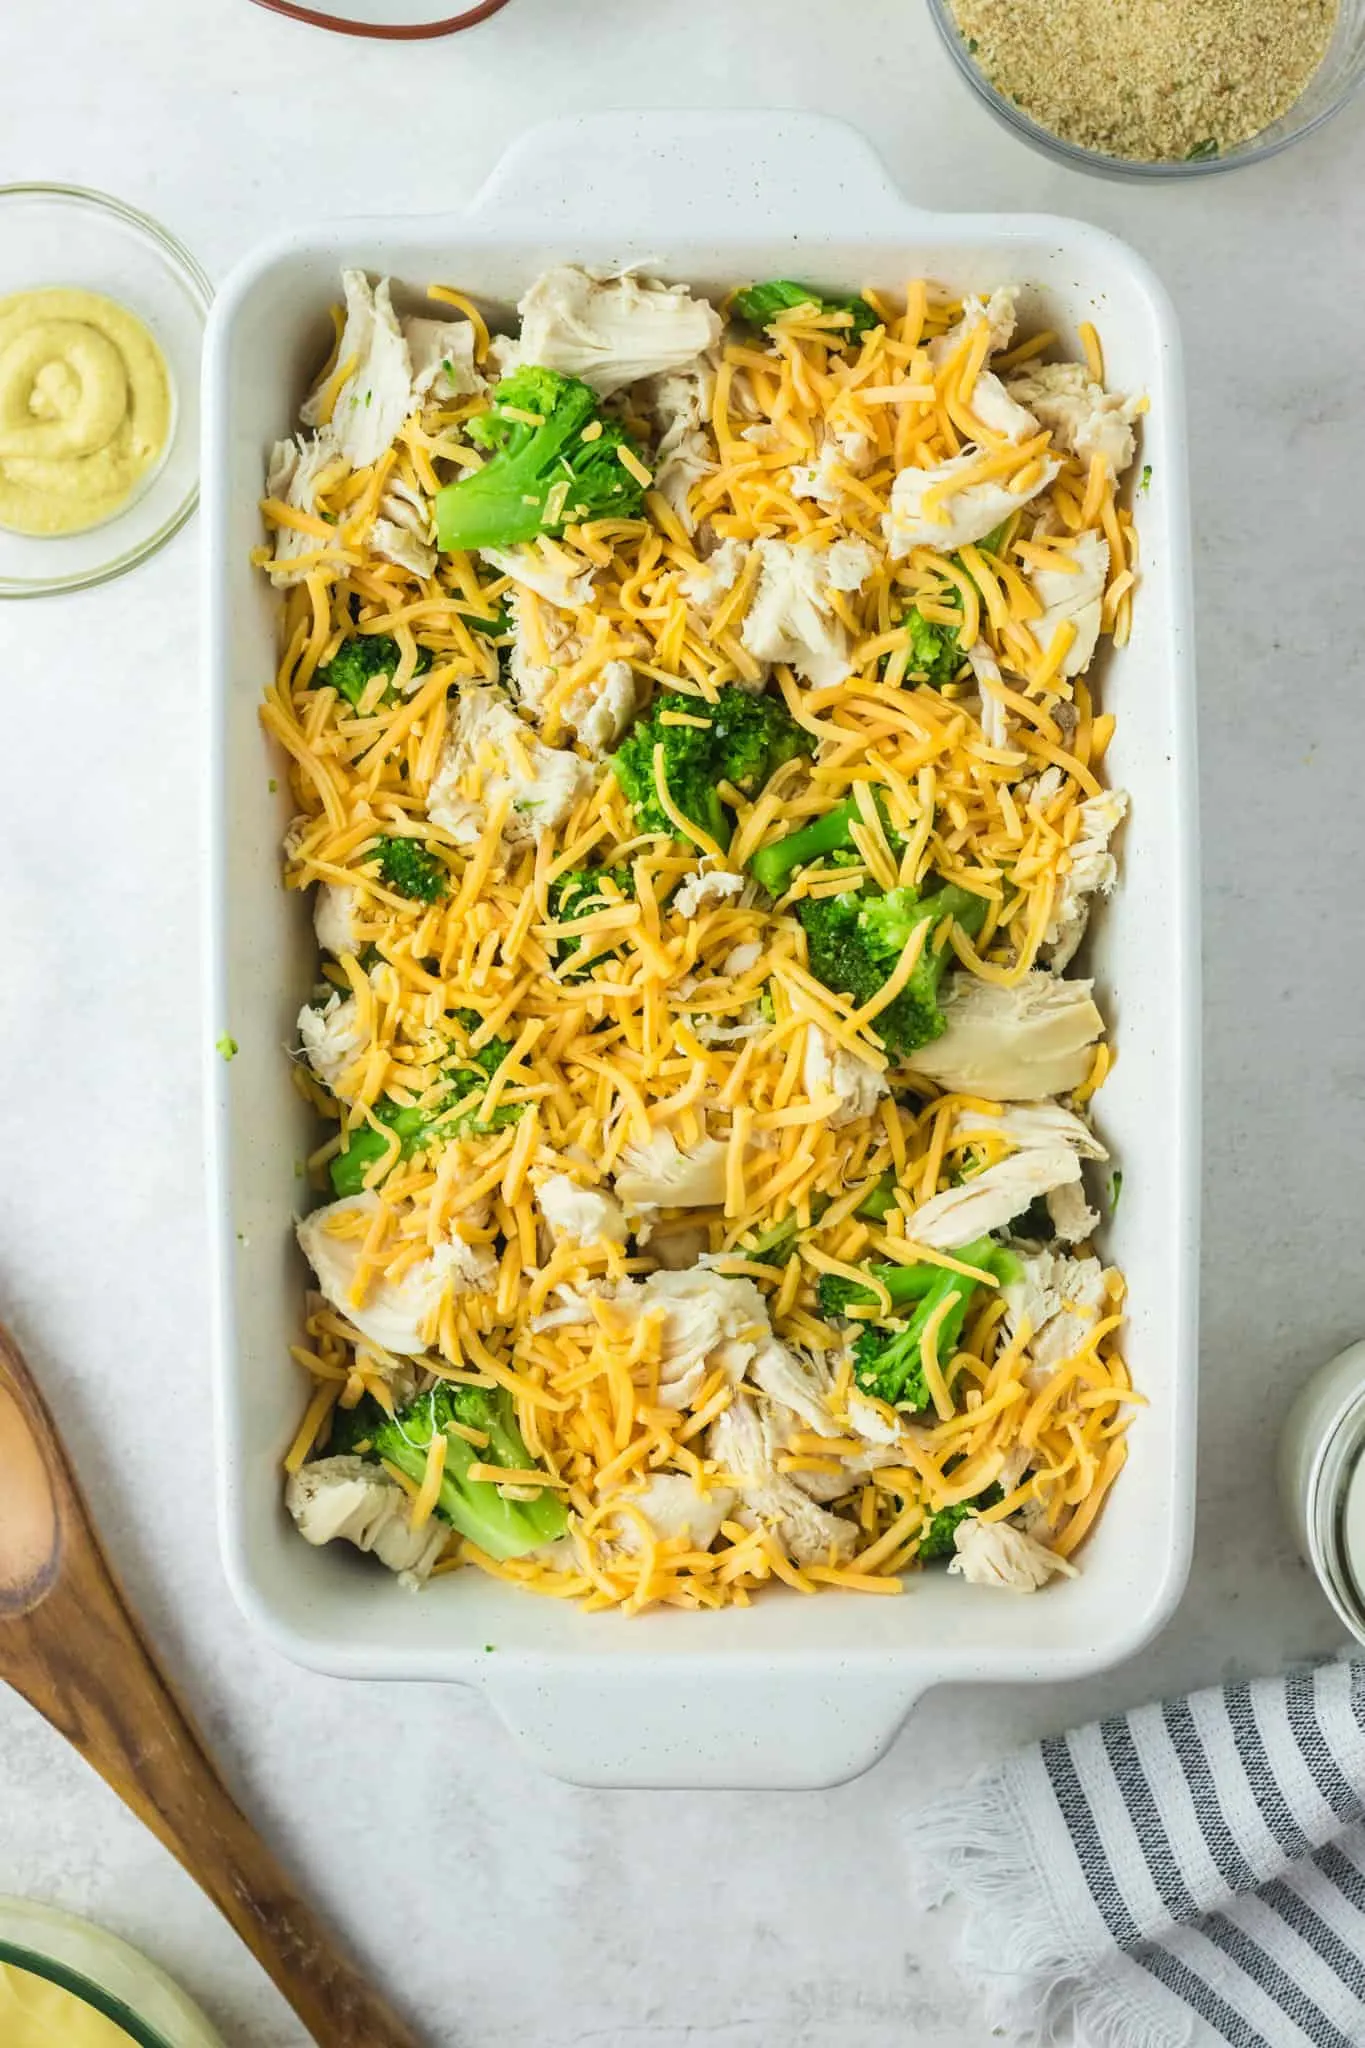 shredded cheddar cheese on top of chopped chicken and broccoli florets in a baking dish